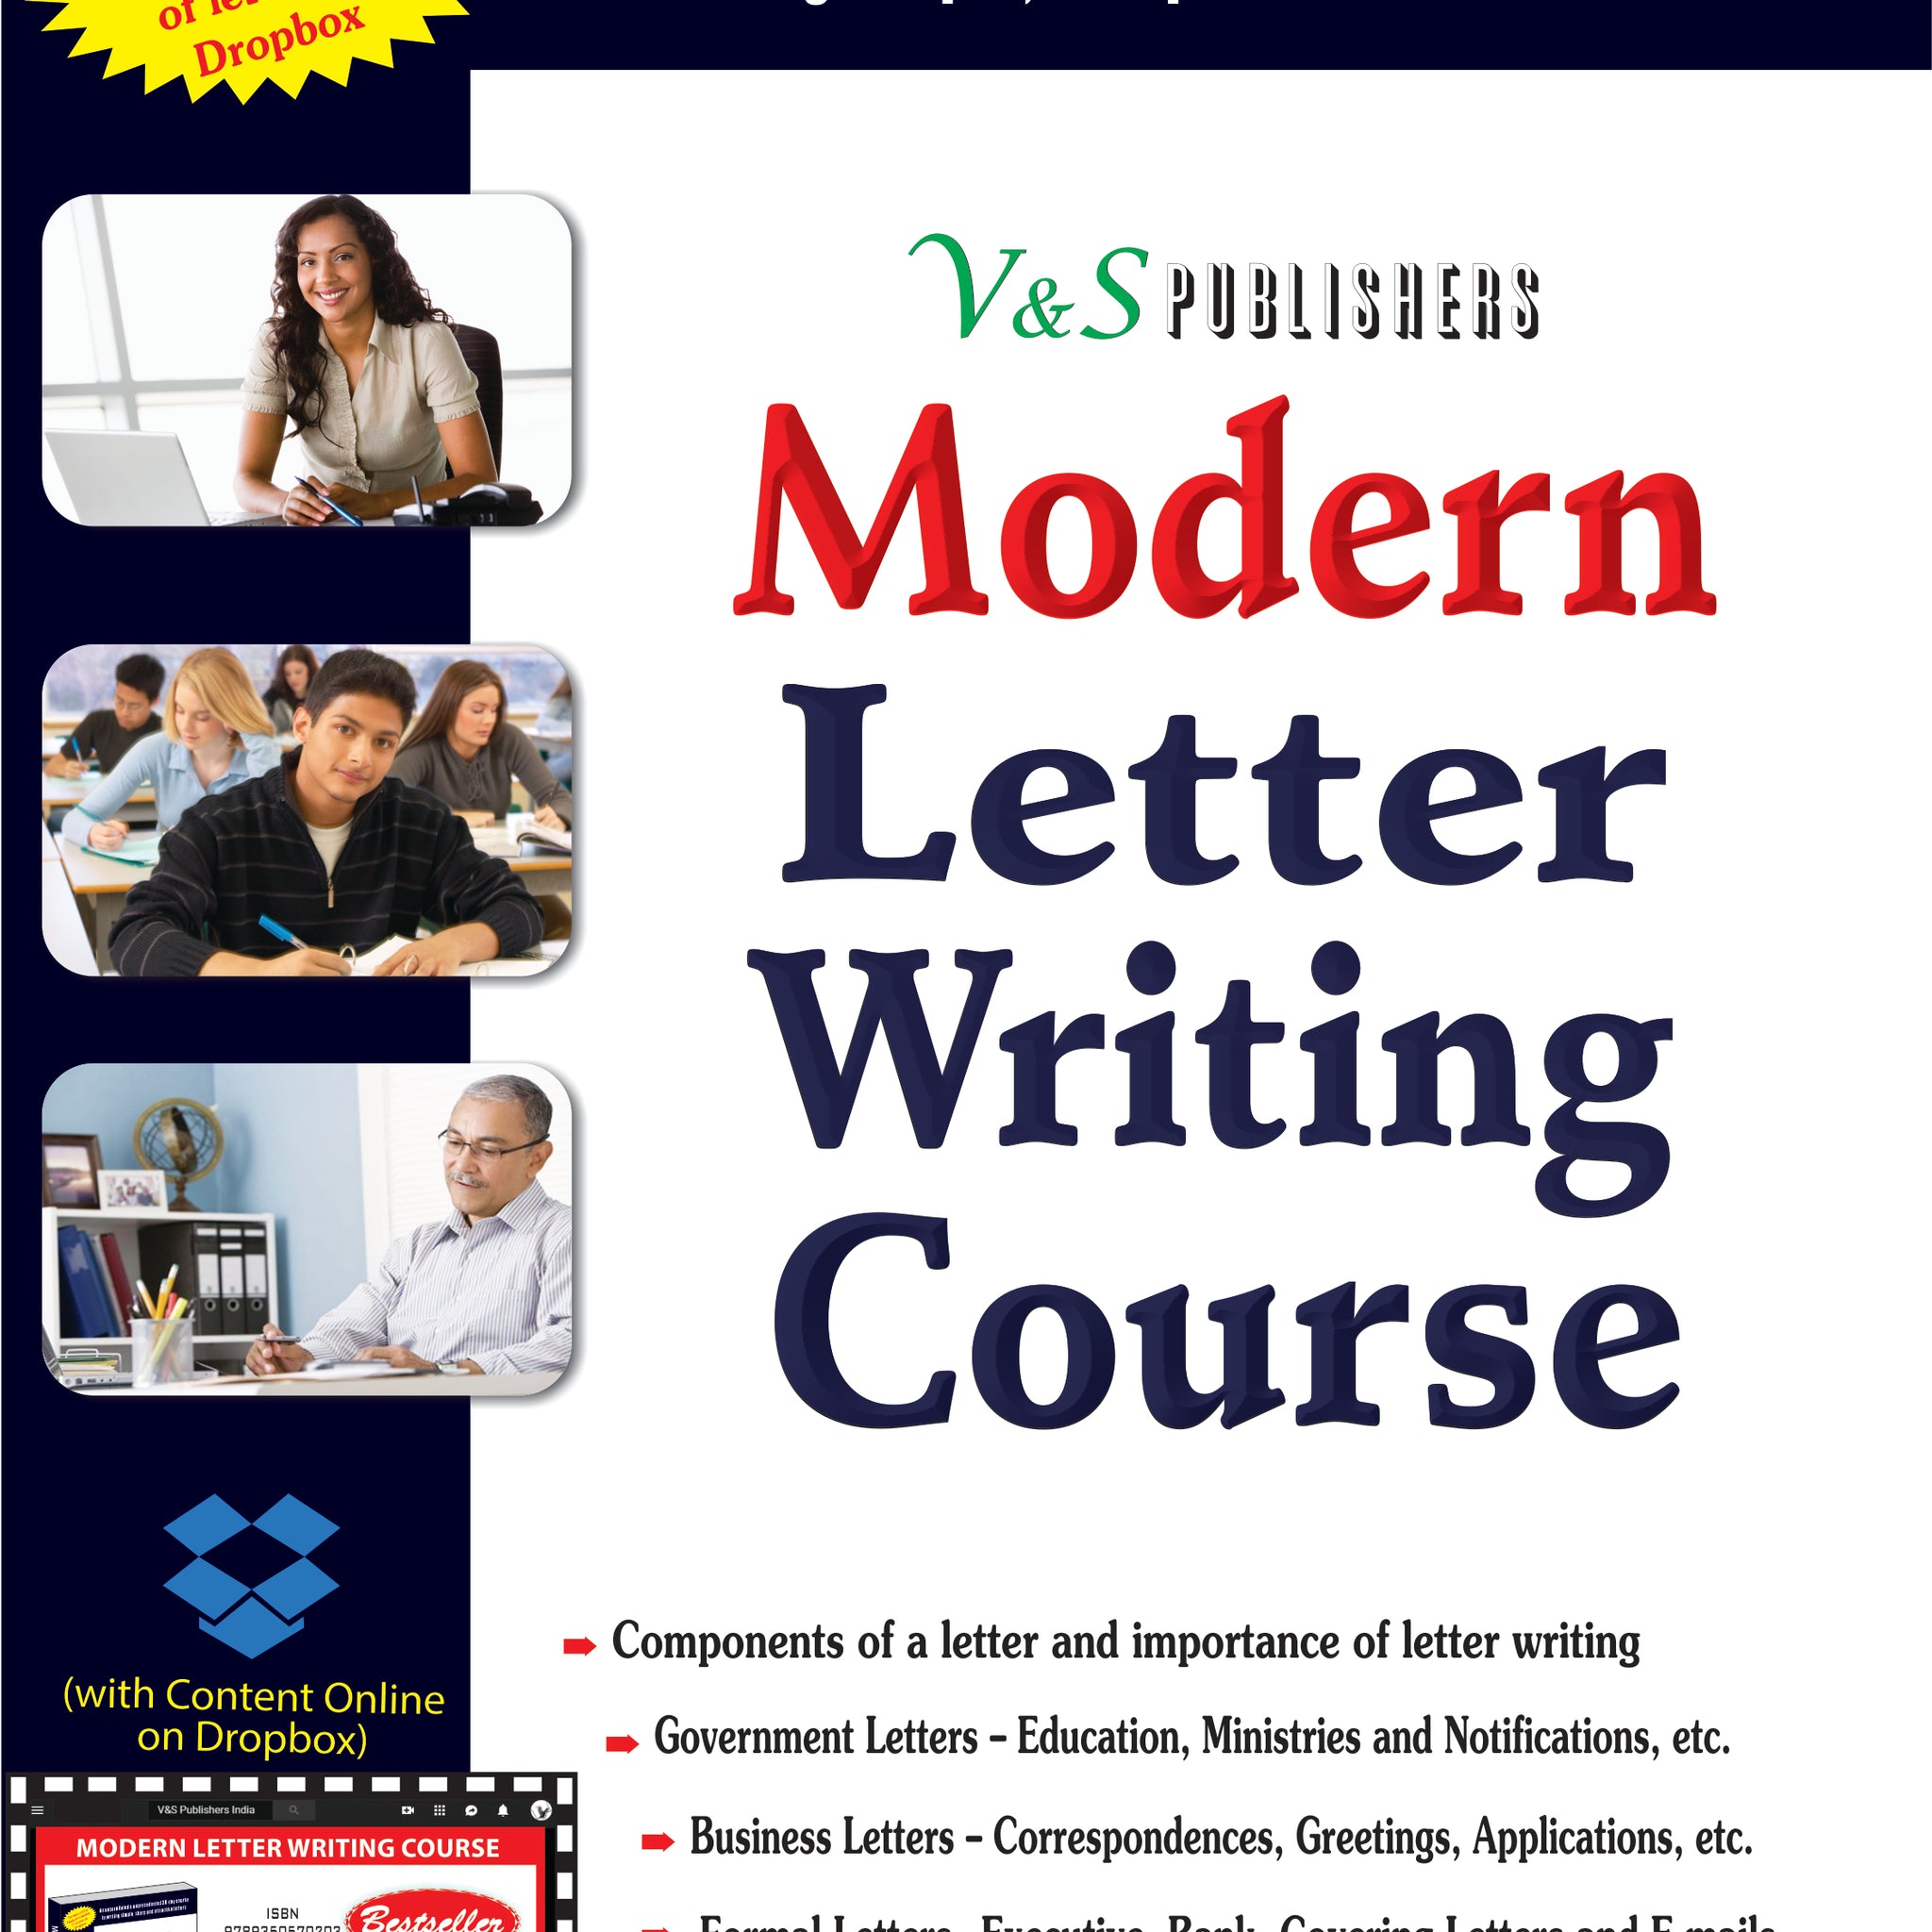 Modern Letter Writing Course (With Online Content on Dropbox)